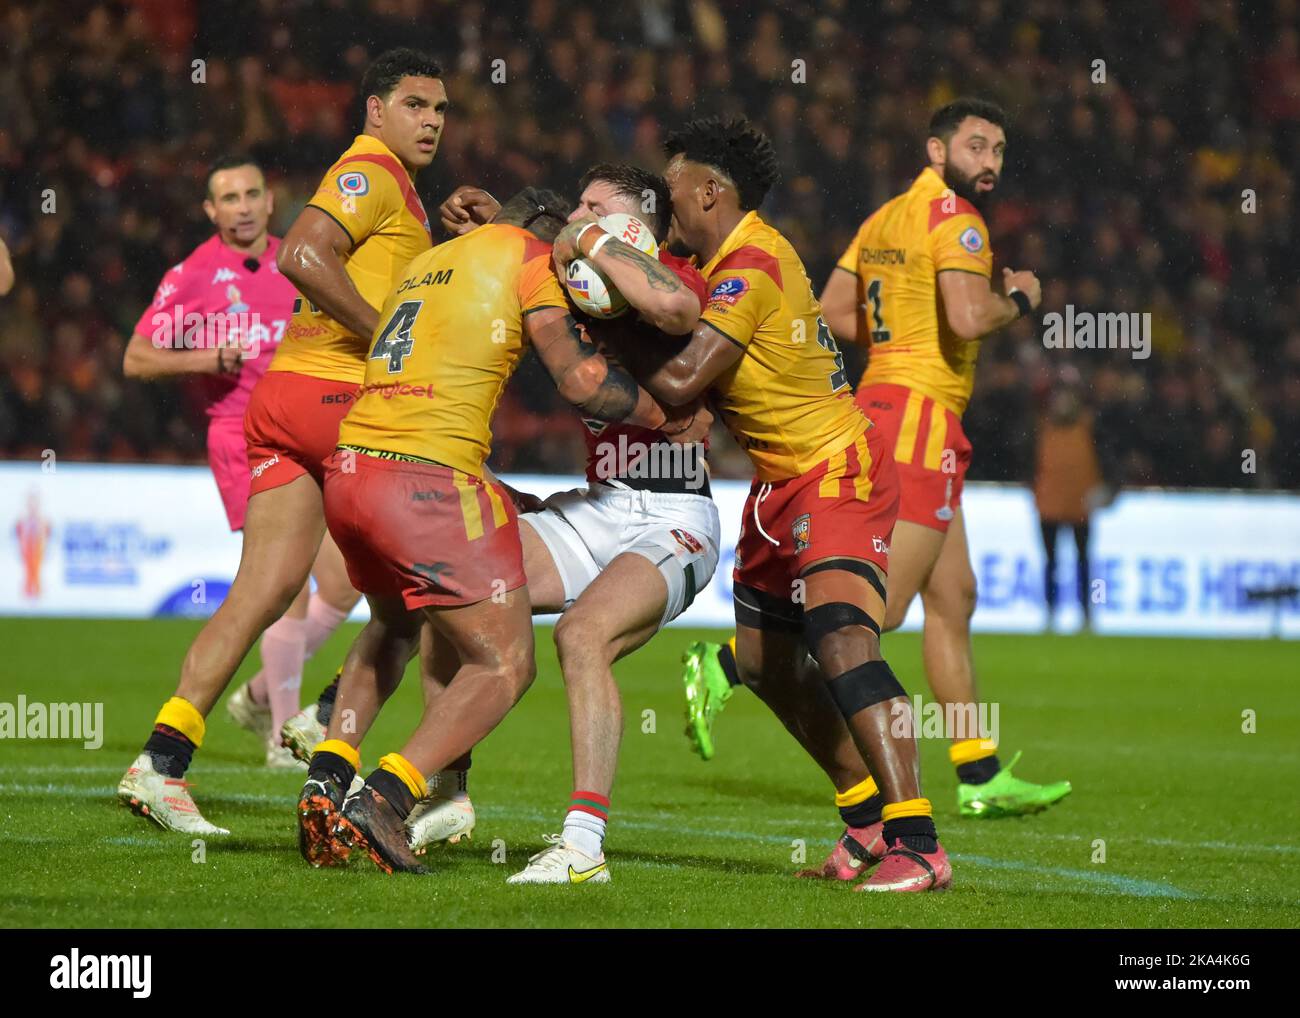 South Yorkshire, UK, October 31 2022, Rugby League World Cup 2021 group D match between Papua New Guinea v Wales at The Eco-Power Stadium, Doncaster, South Yorkshire, UK on October 31 2022   (Photo by Craig Cresswell/Alamy Live News) Stock Photo